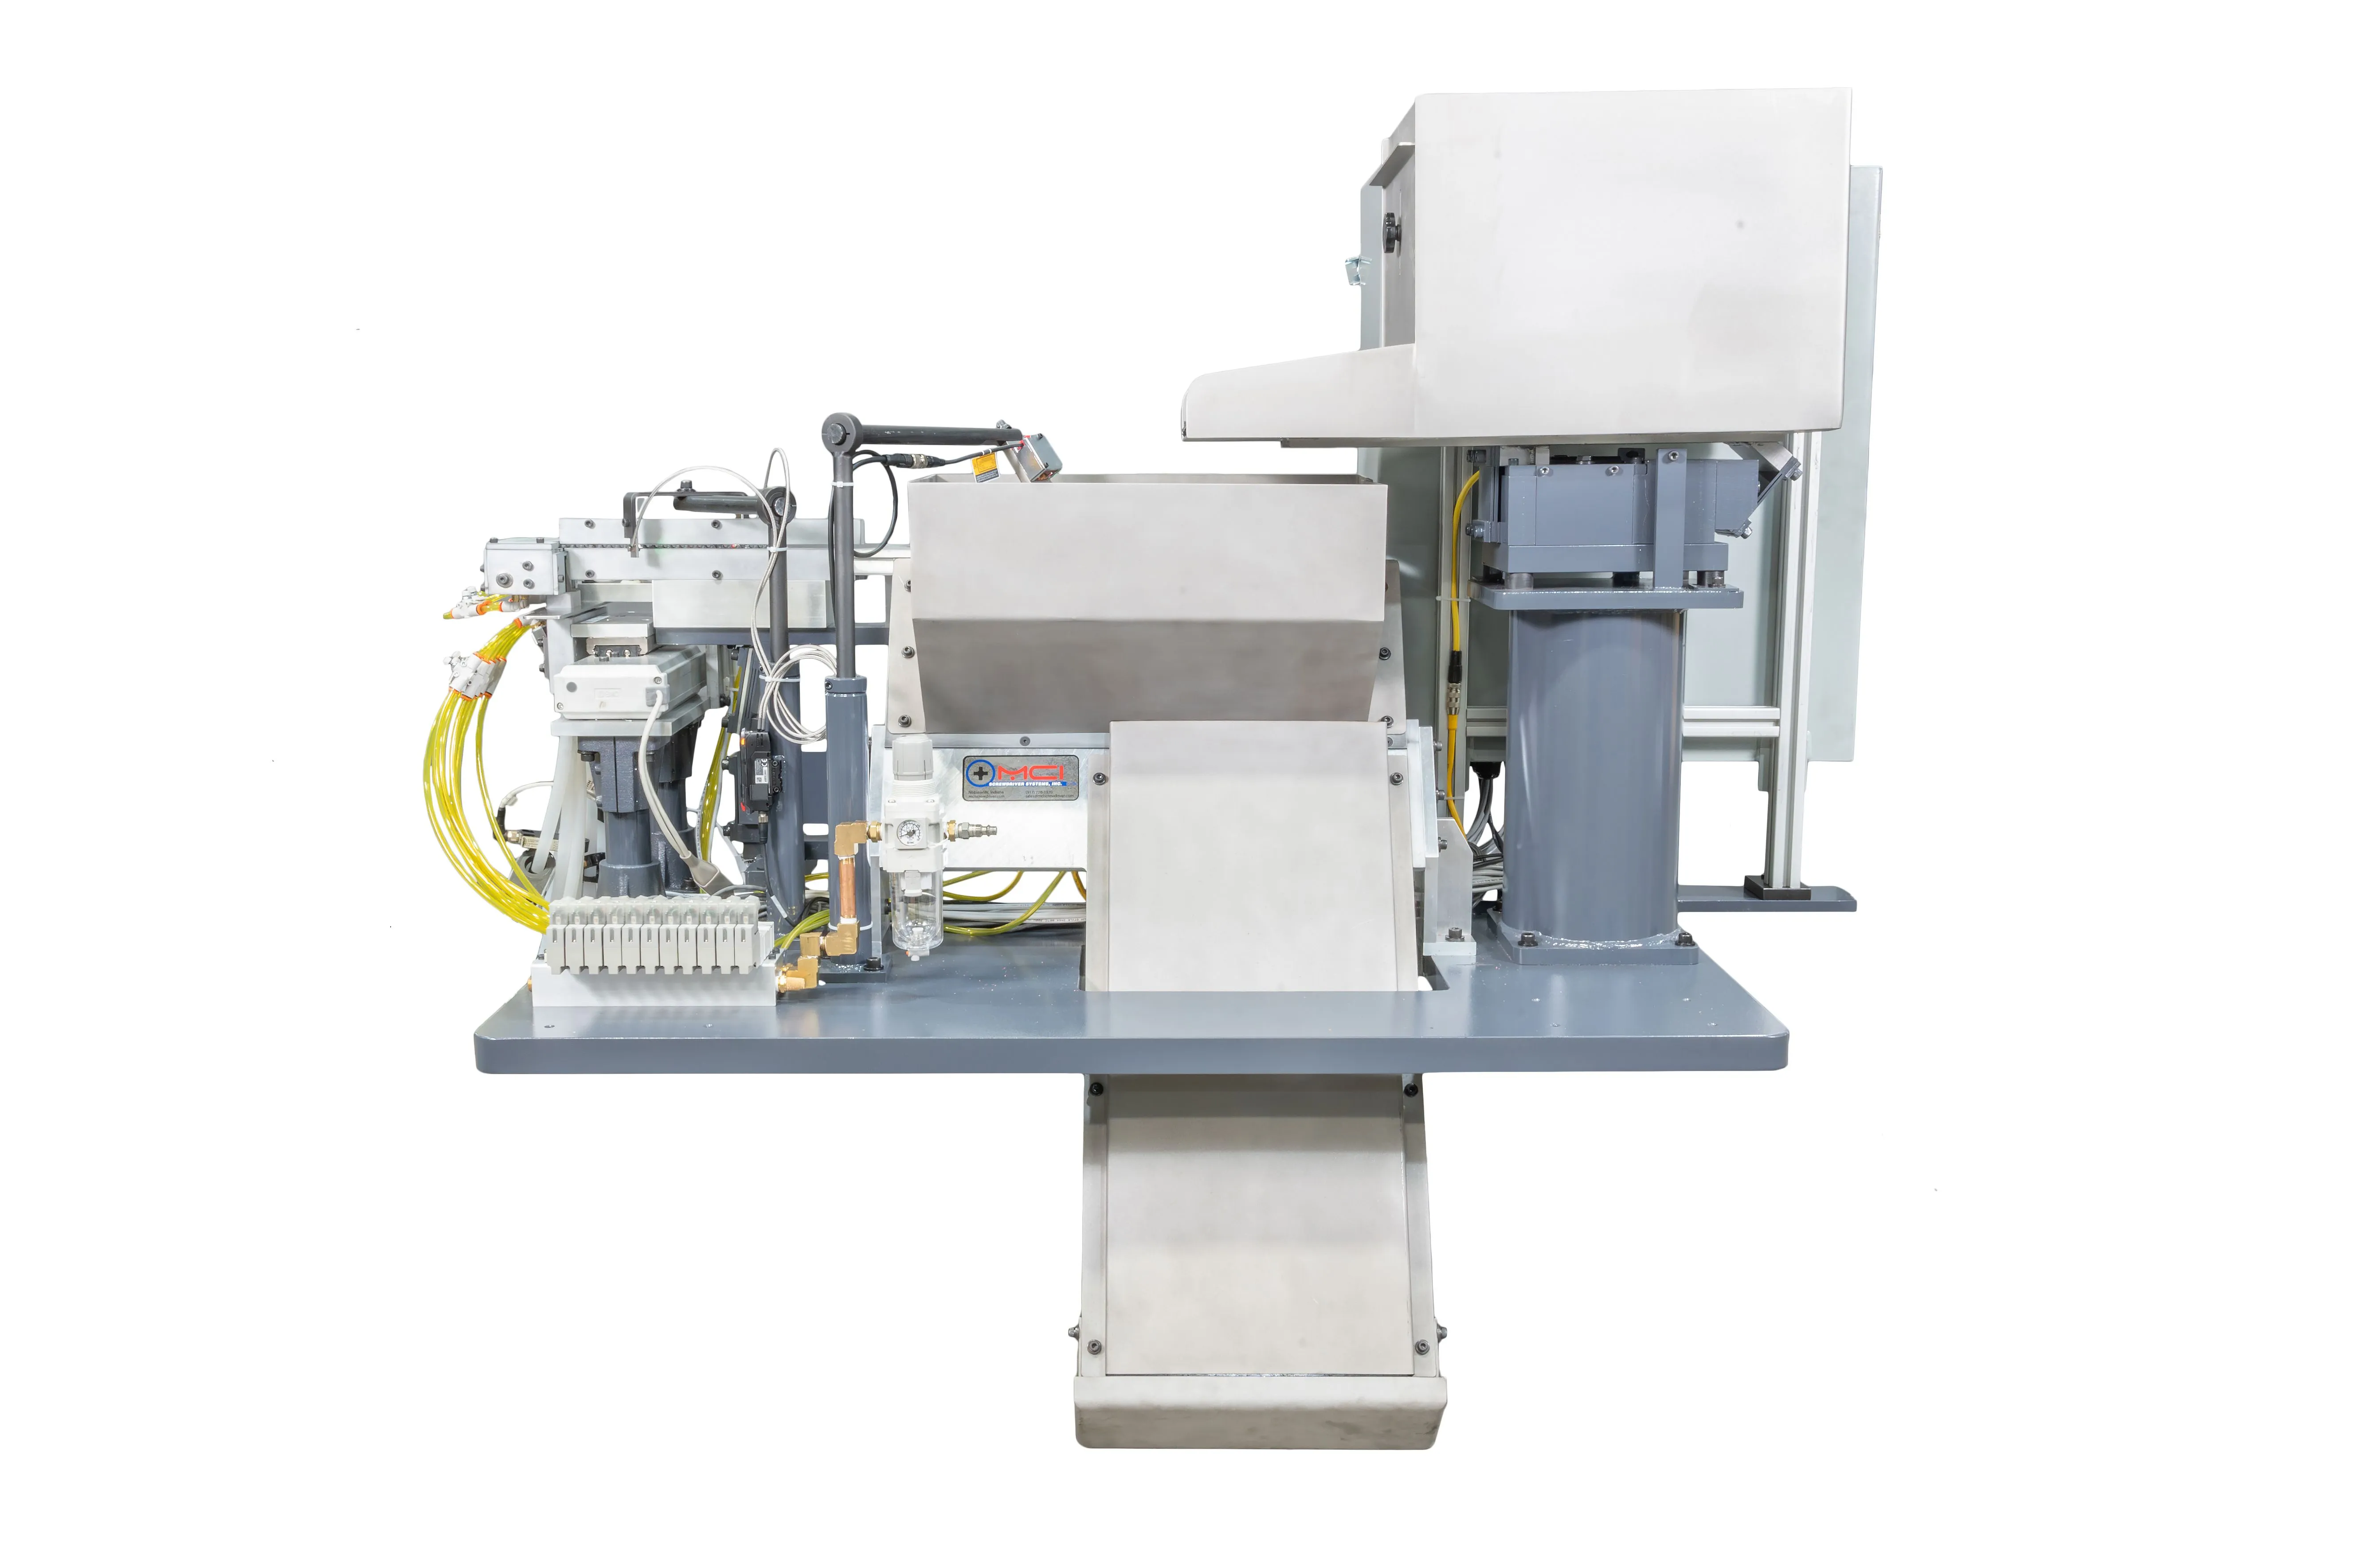 Industrial automated machine with various components including cables, control boxes and mechanical parts on a steel platform, isolated on a white background.